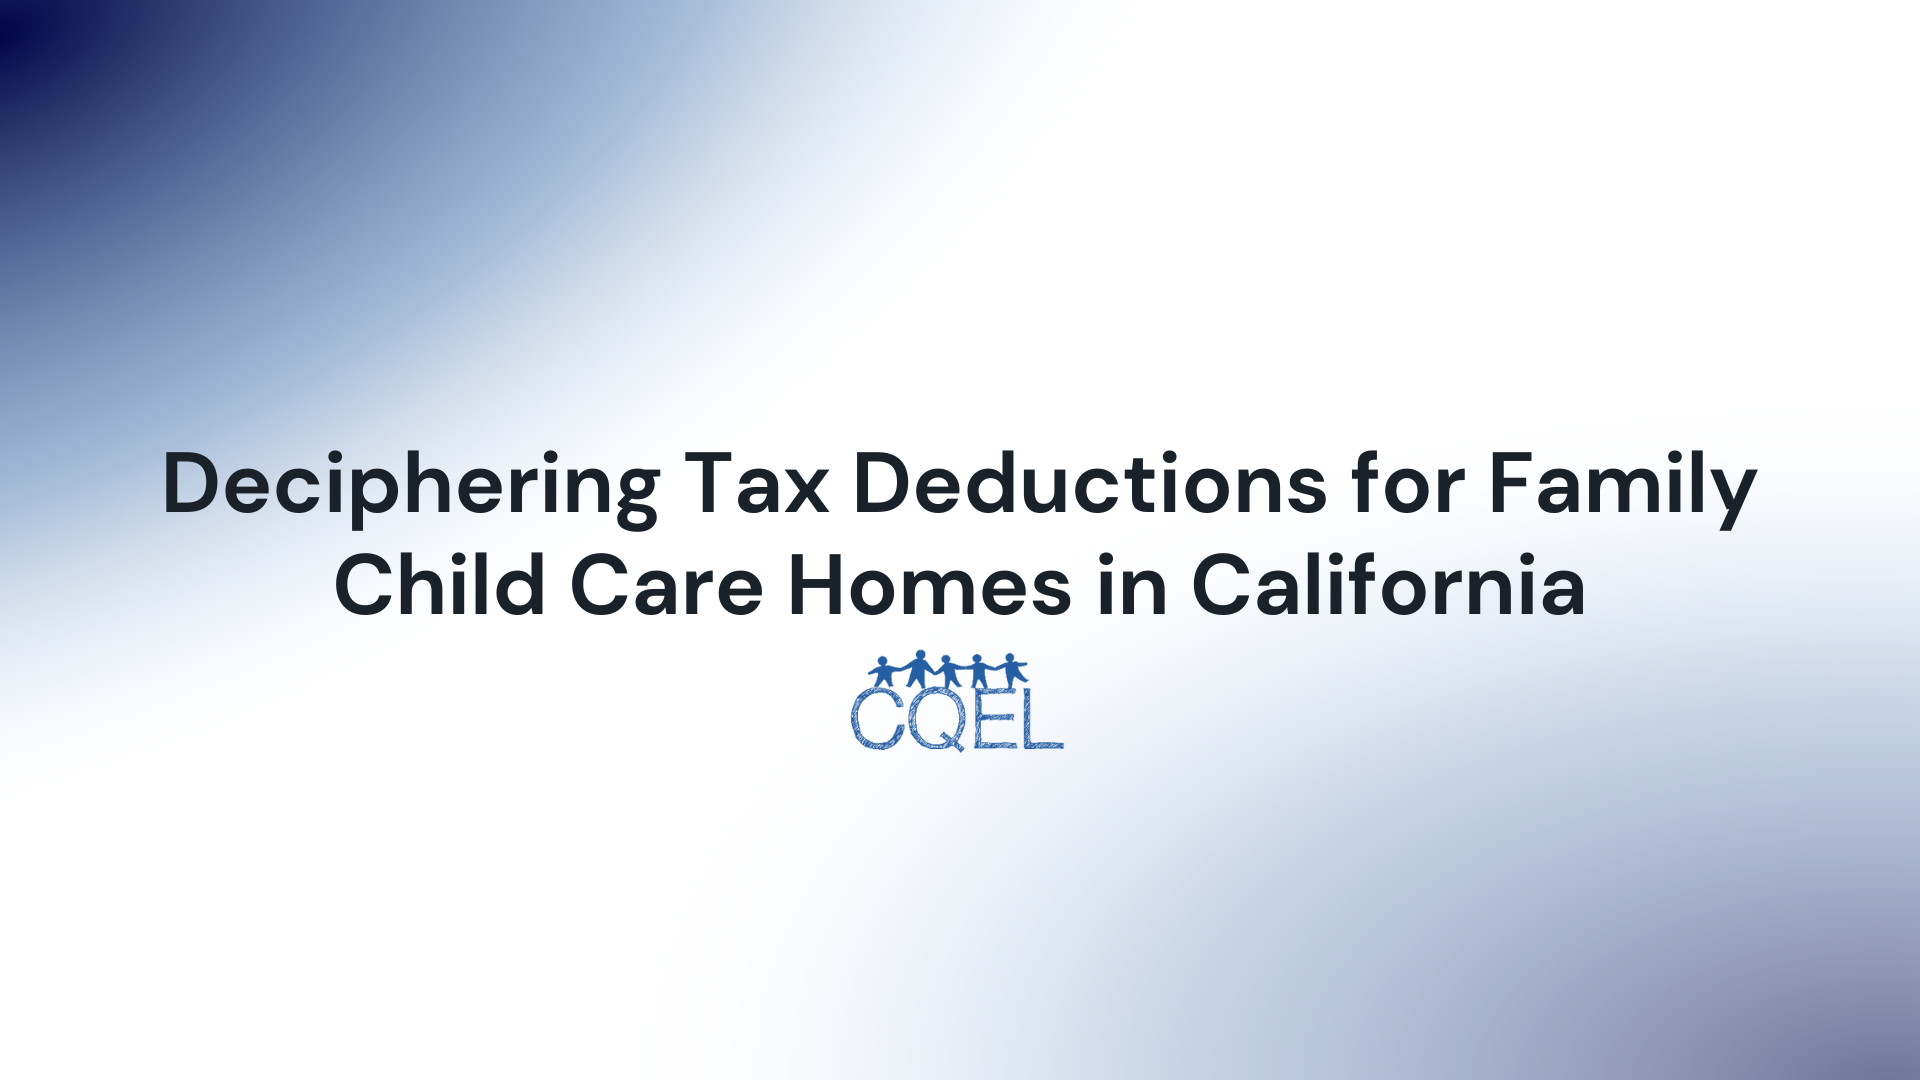 Deciphering Tax Deductions for Family Child Care Homes in California